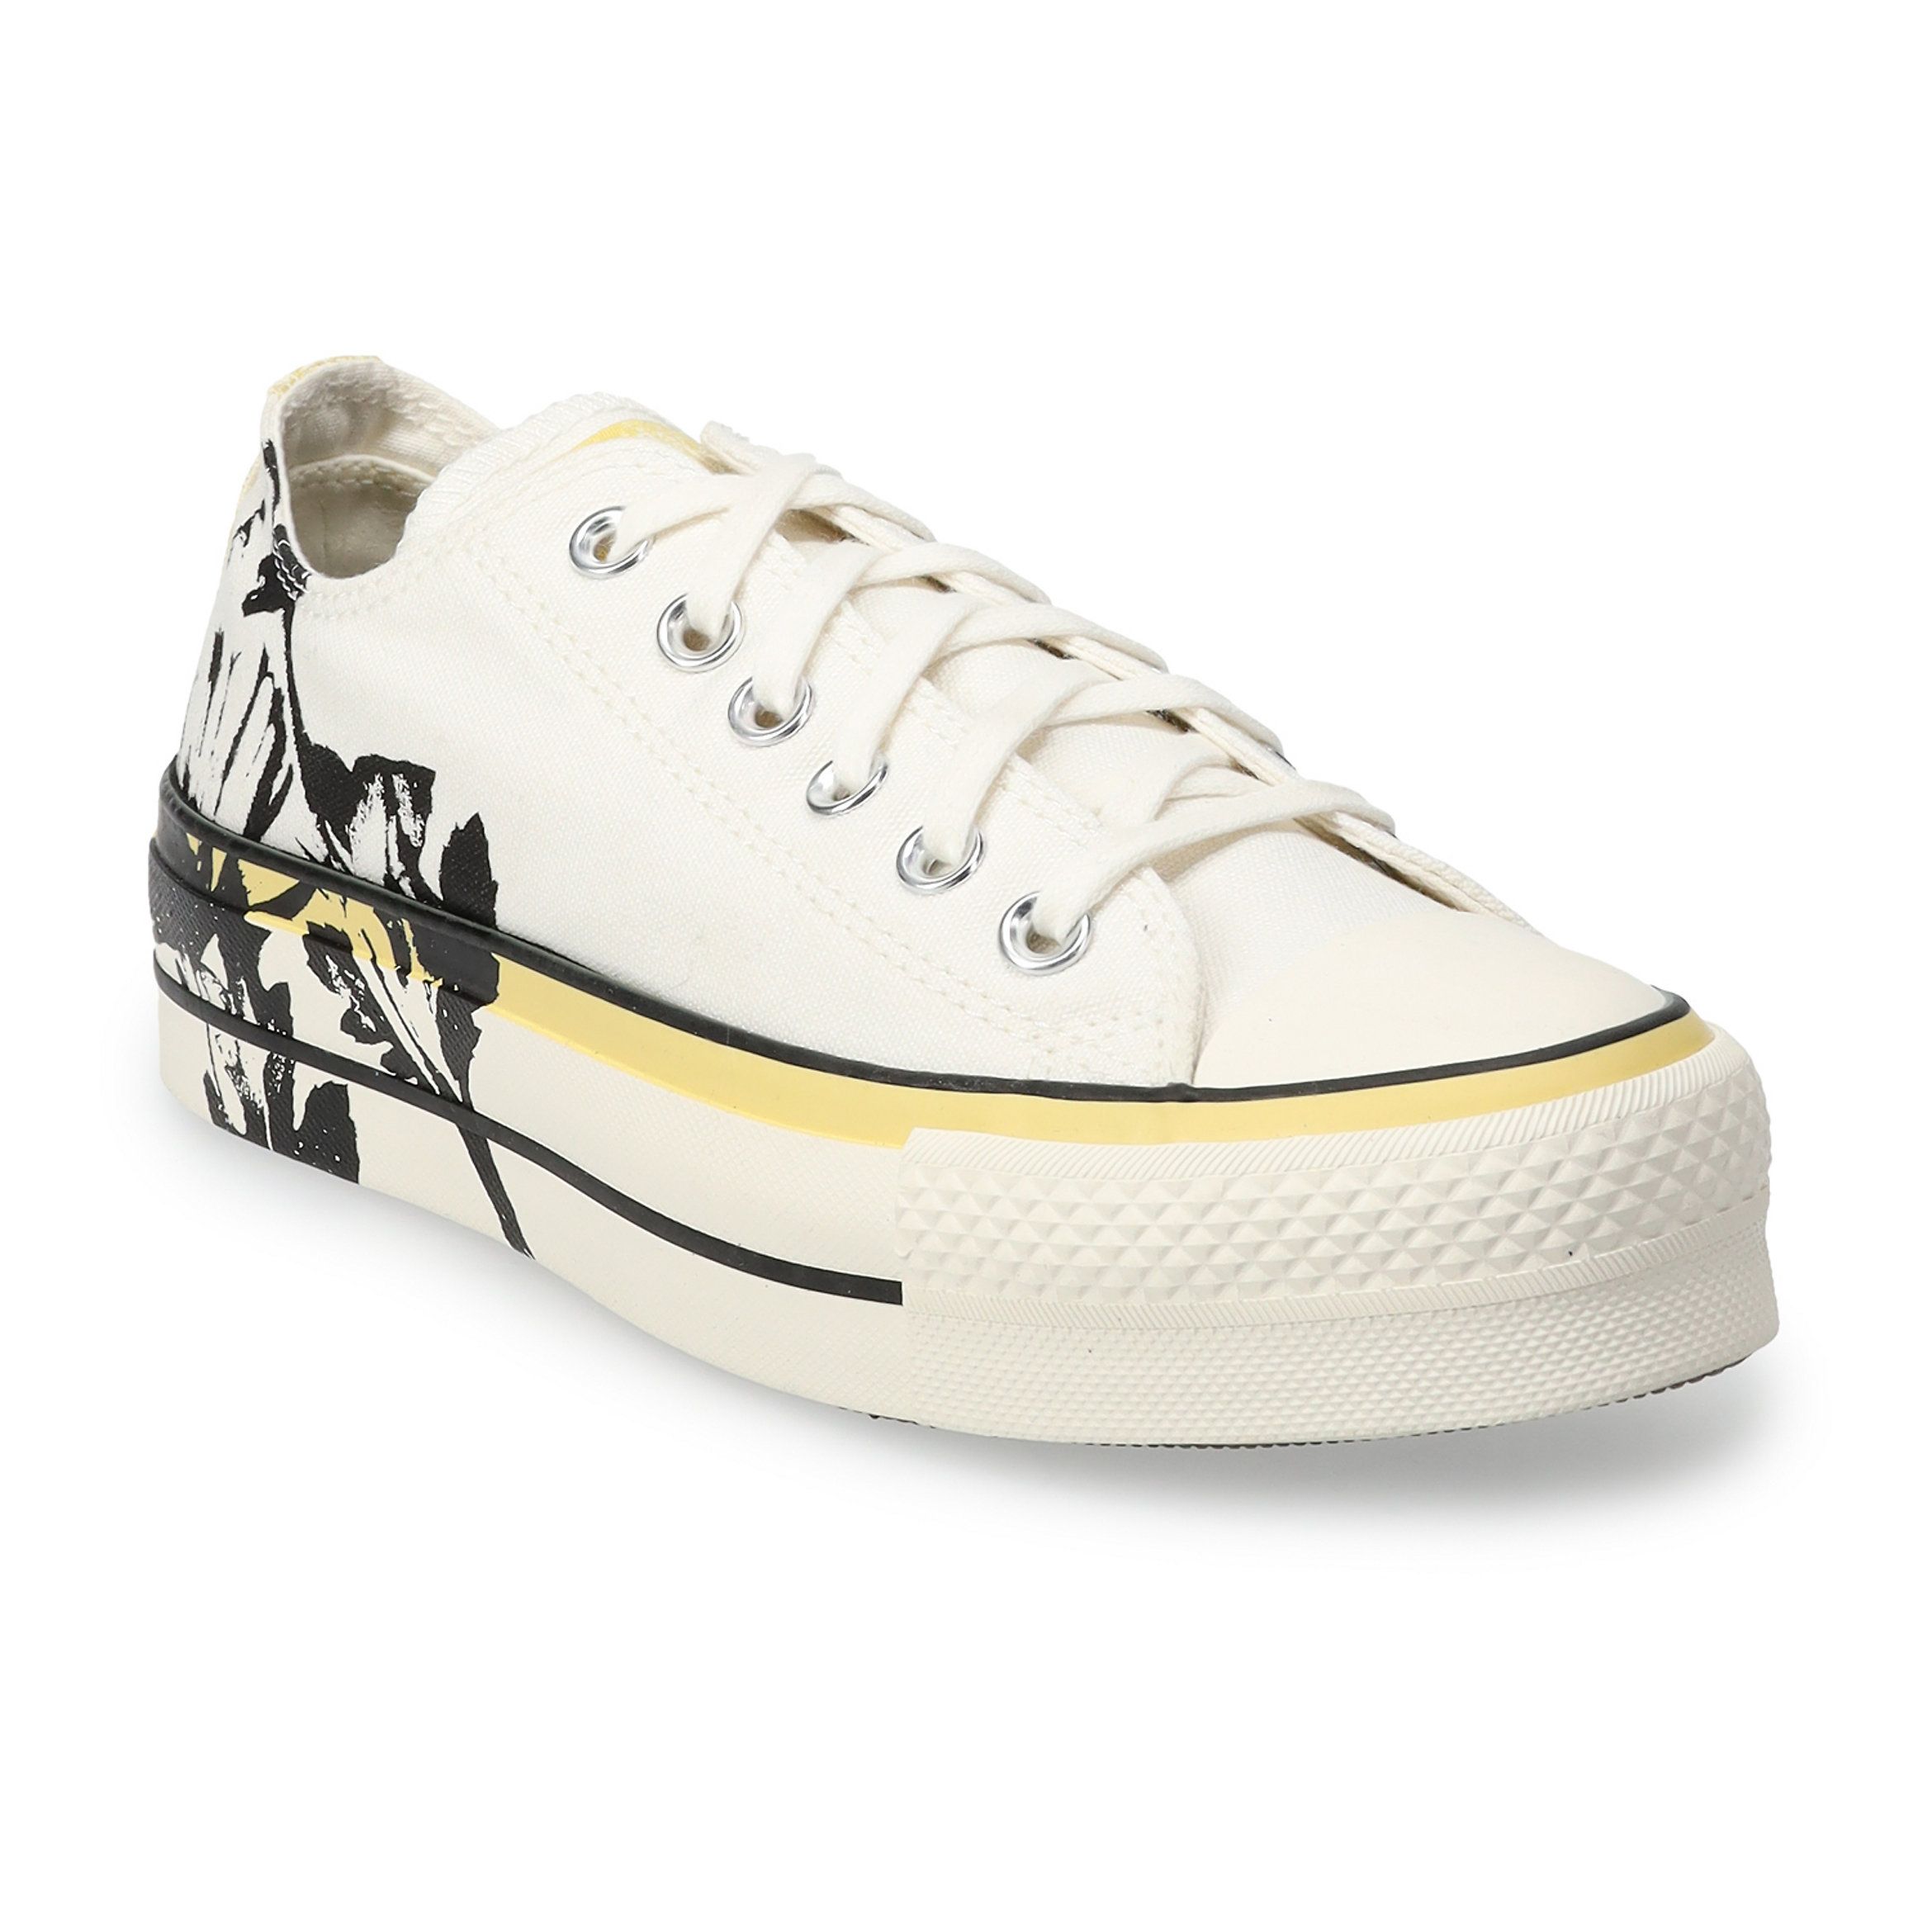 Women's Converse Chuck Taylor All Star Floral Lift Sneakers | Kohl's